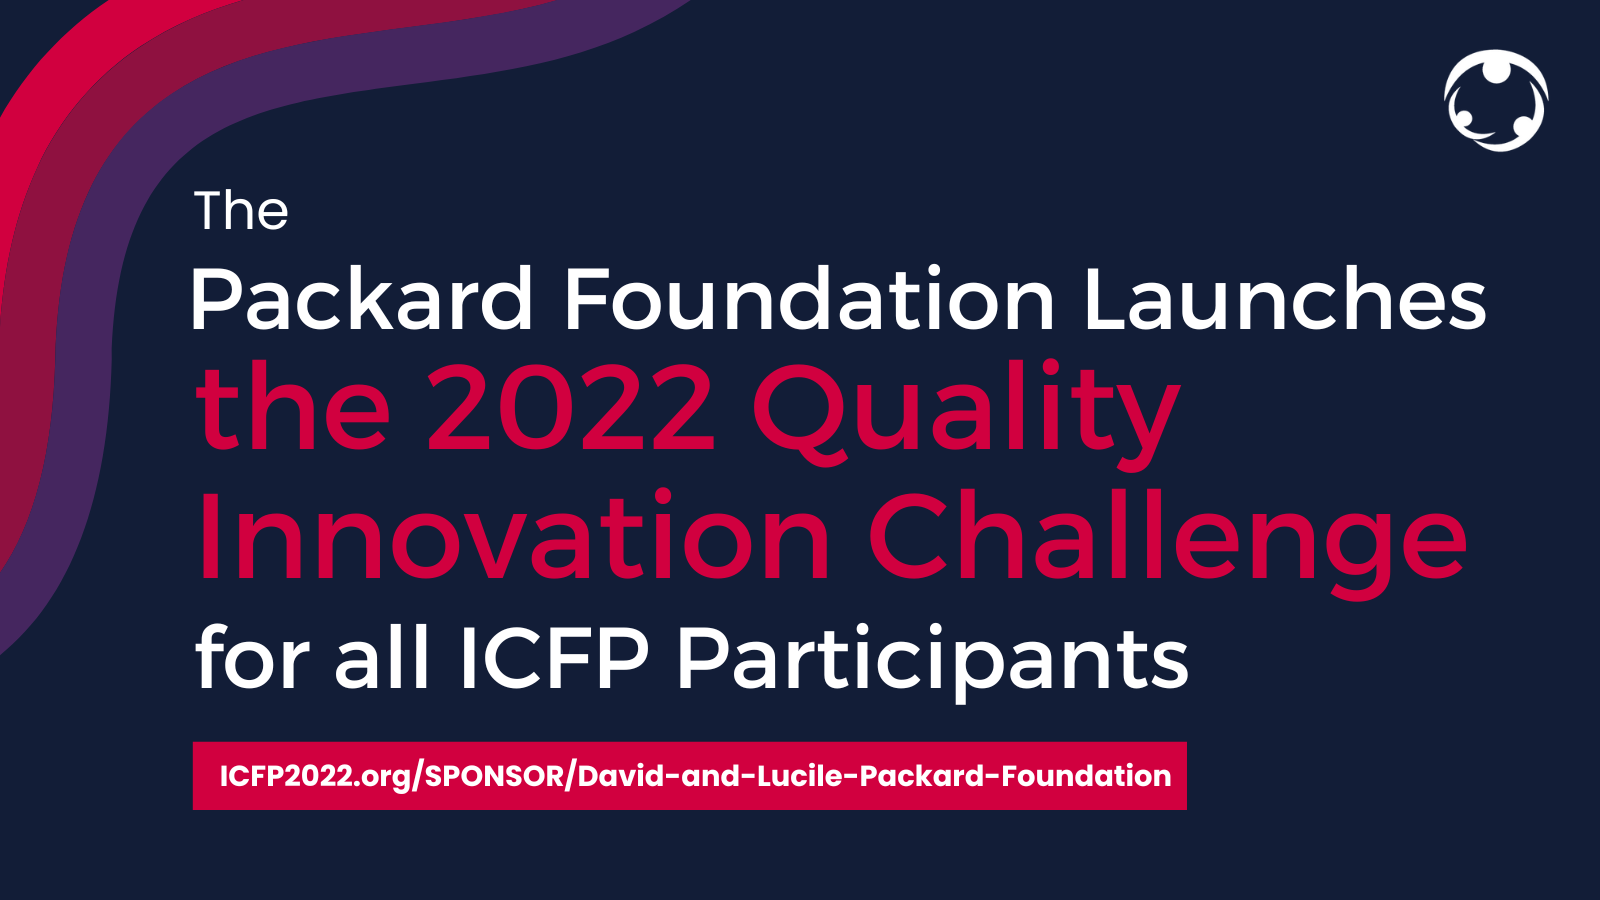 Packard Foundation: Quality Innovation Challenge Call for Proposals